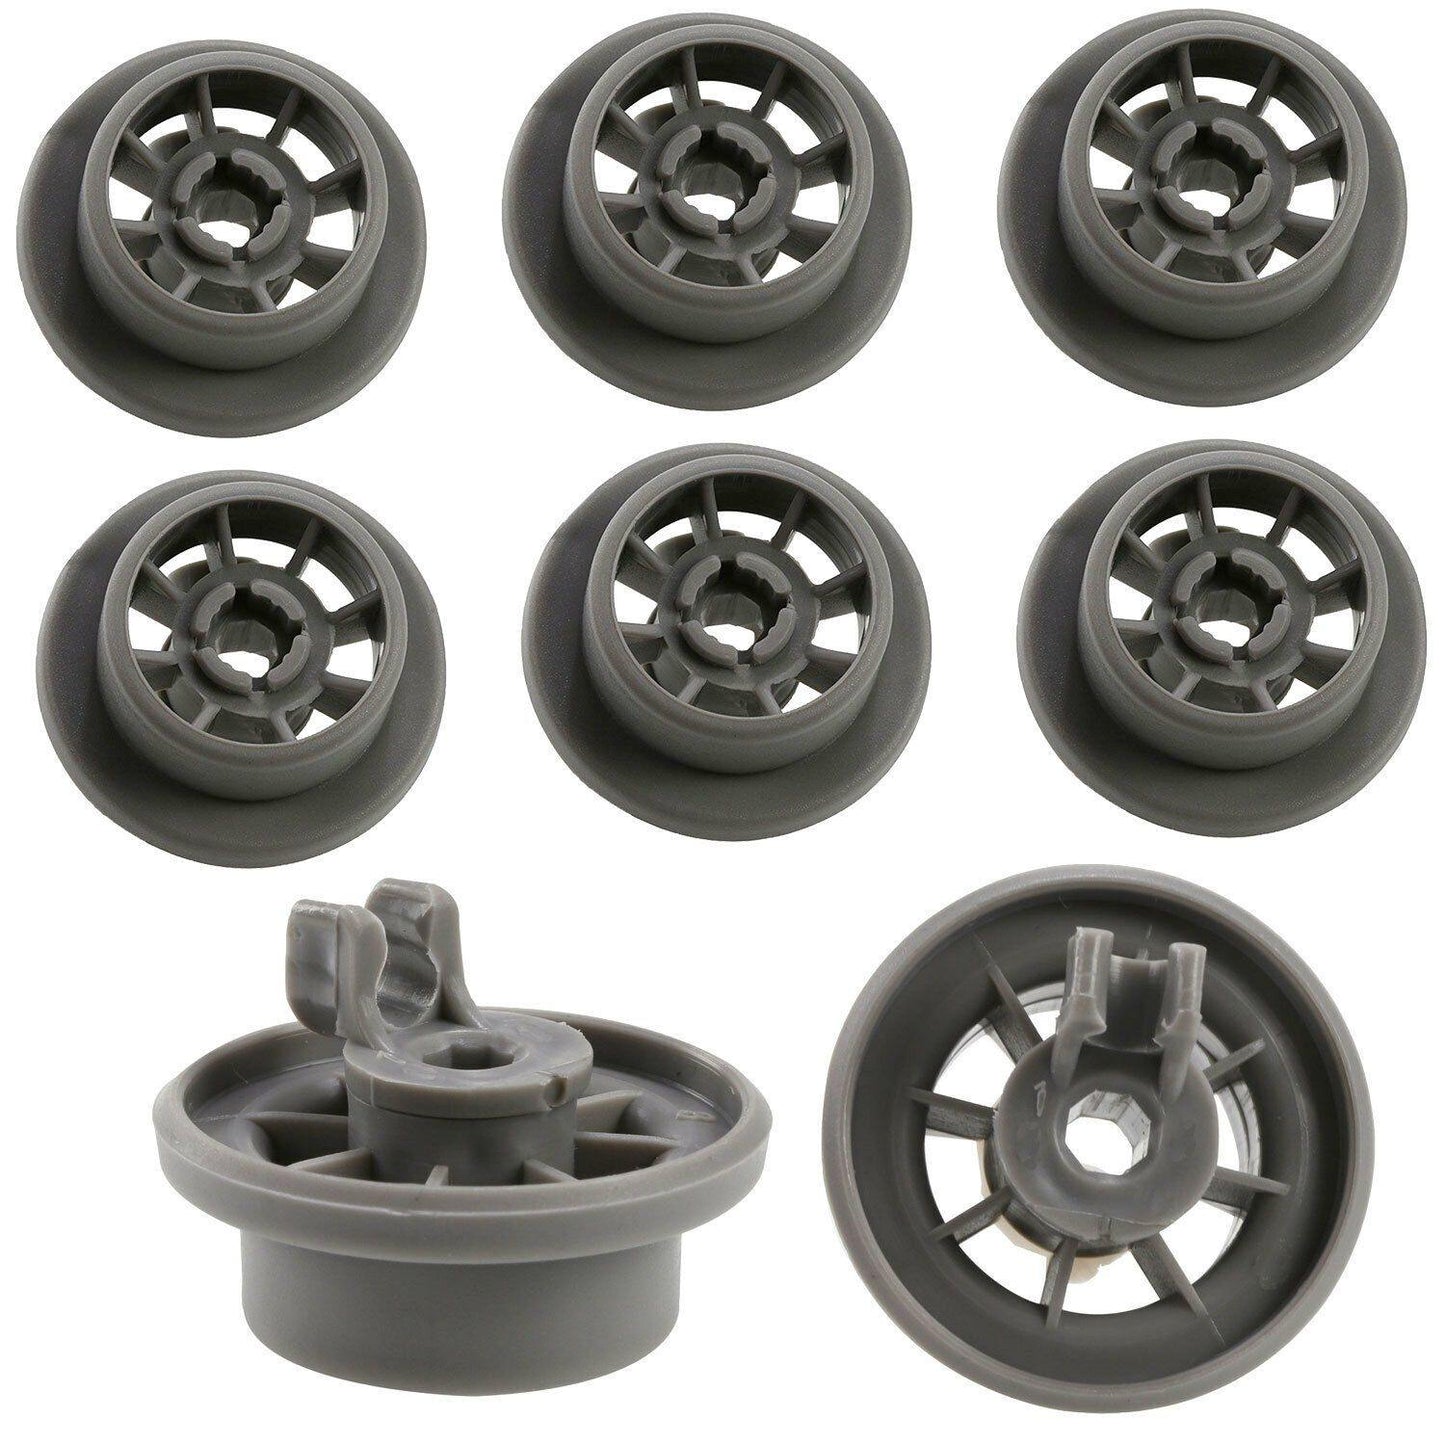 8X Diswasher Lower Bakset Wheel For LG XD Series XD3A15MB XD5B14WH XD3A25BS Sparesbarn